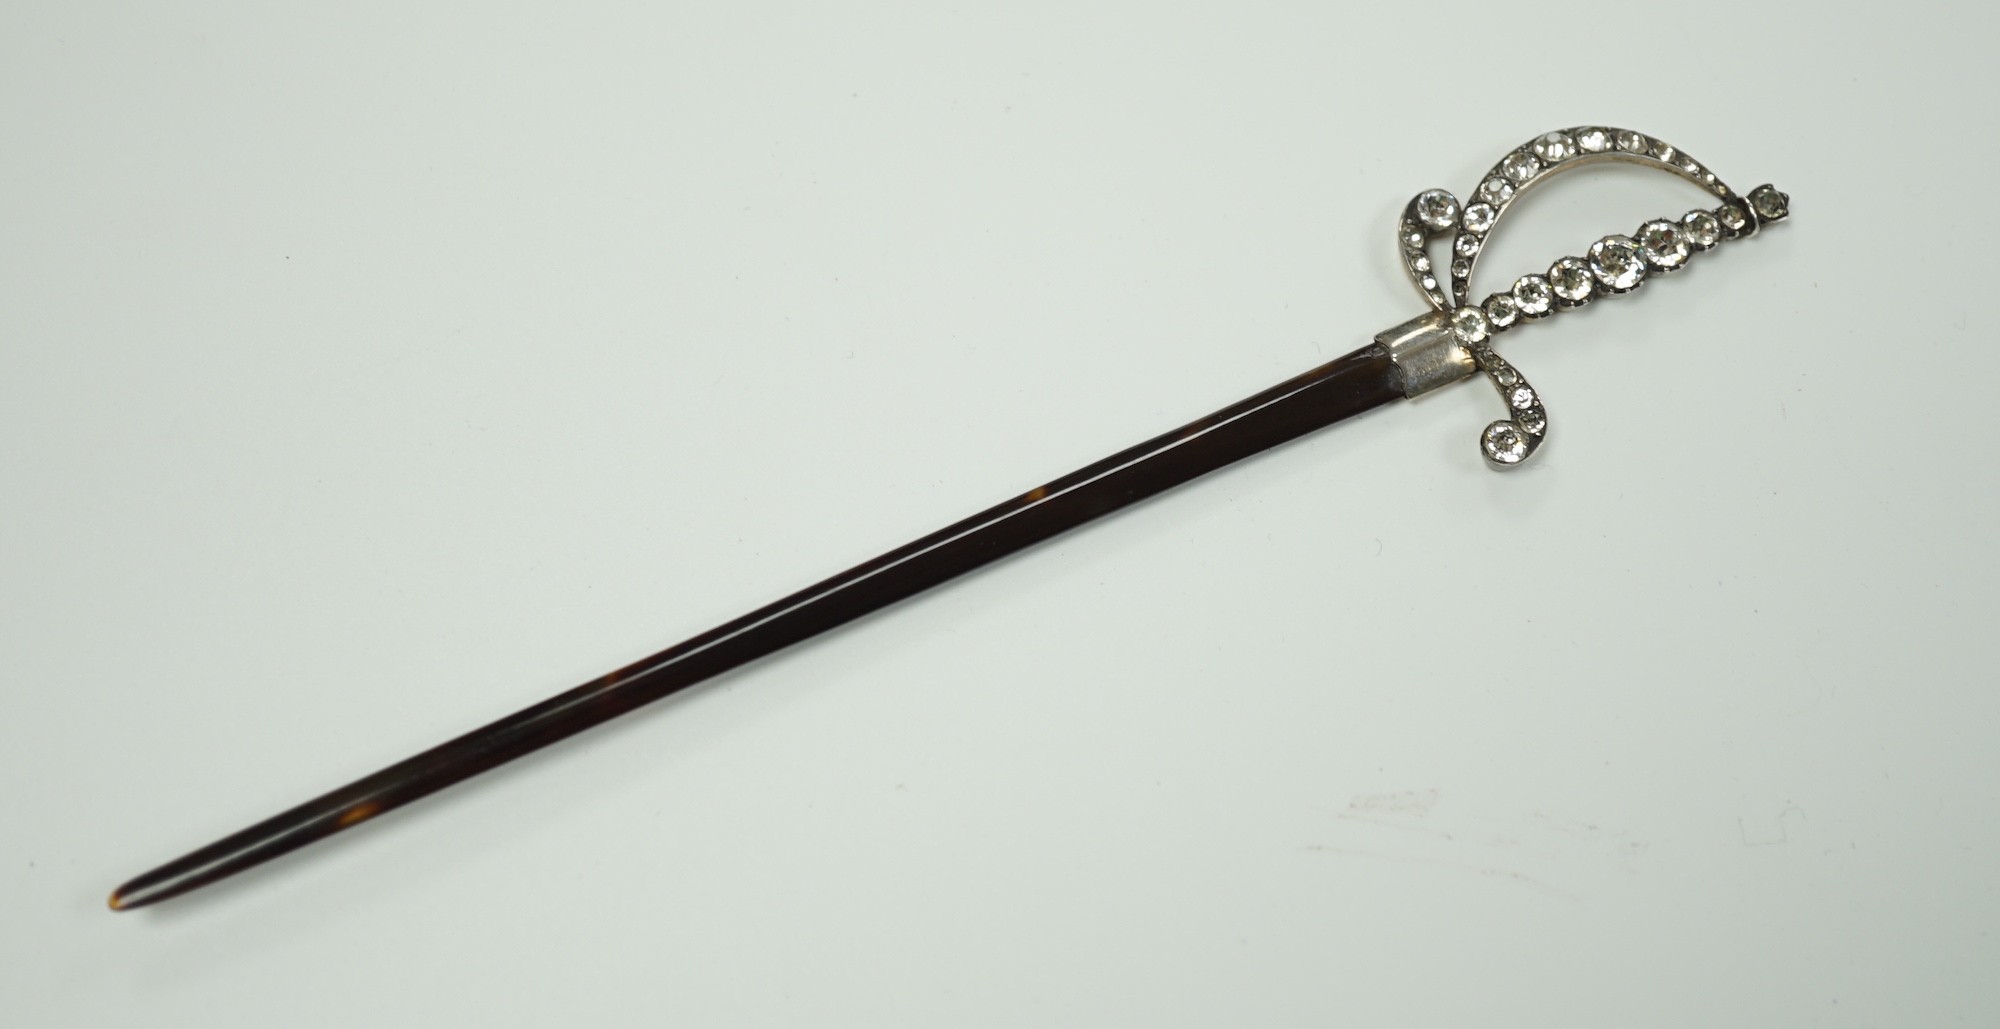 An early 20th century white metal and paste mounted tortoiseshell model of a court sword, 17.7cm, in fitted case.